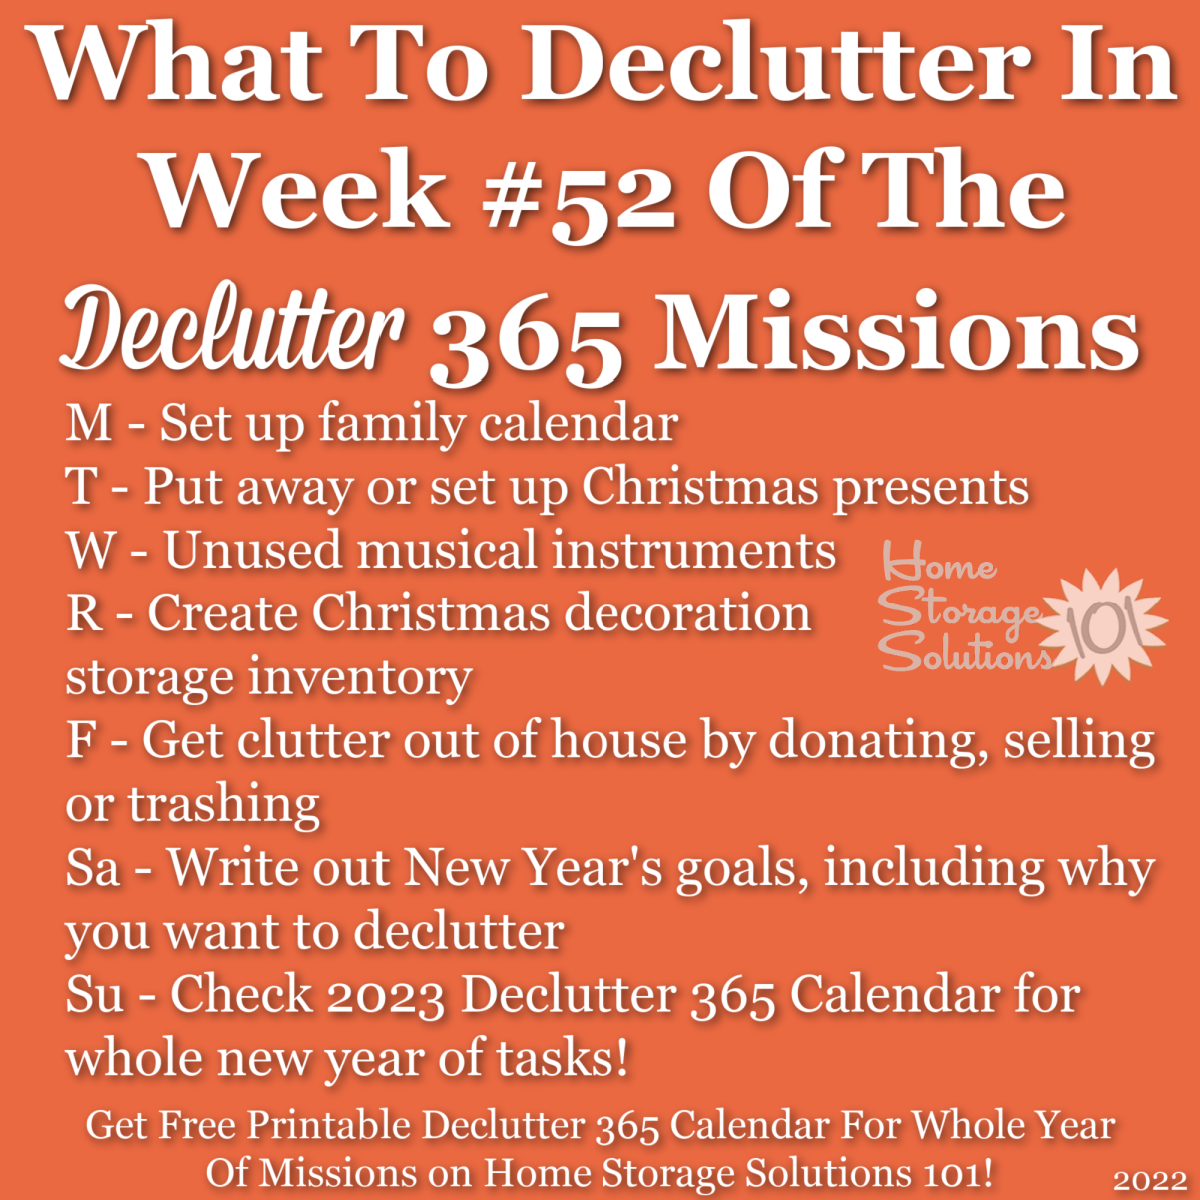 What to declutter in week #52 of the Declutter 365 missions {get a free printable Declutter 365 calendar for a whole year of missions on Home Storage Solutions 101!}